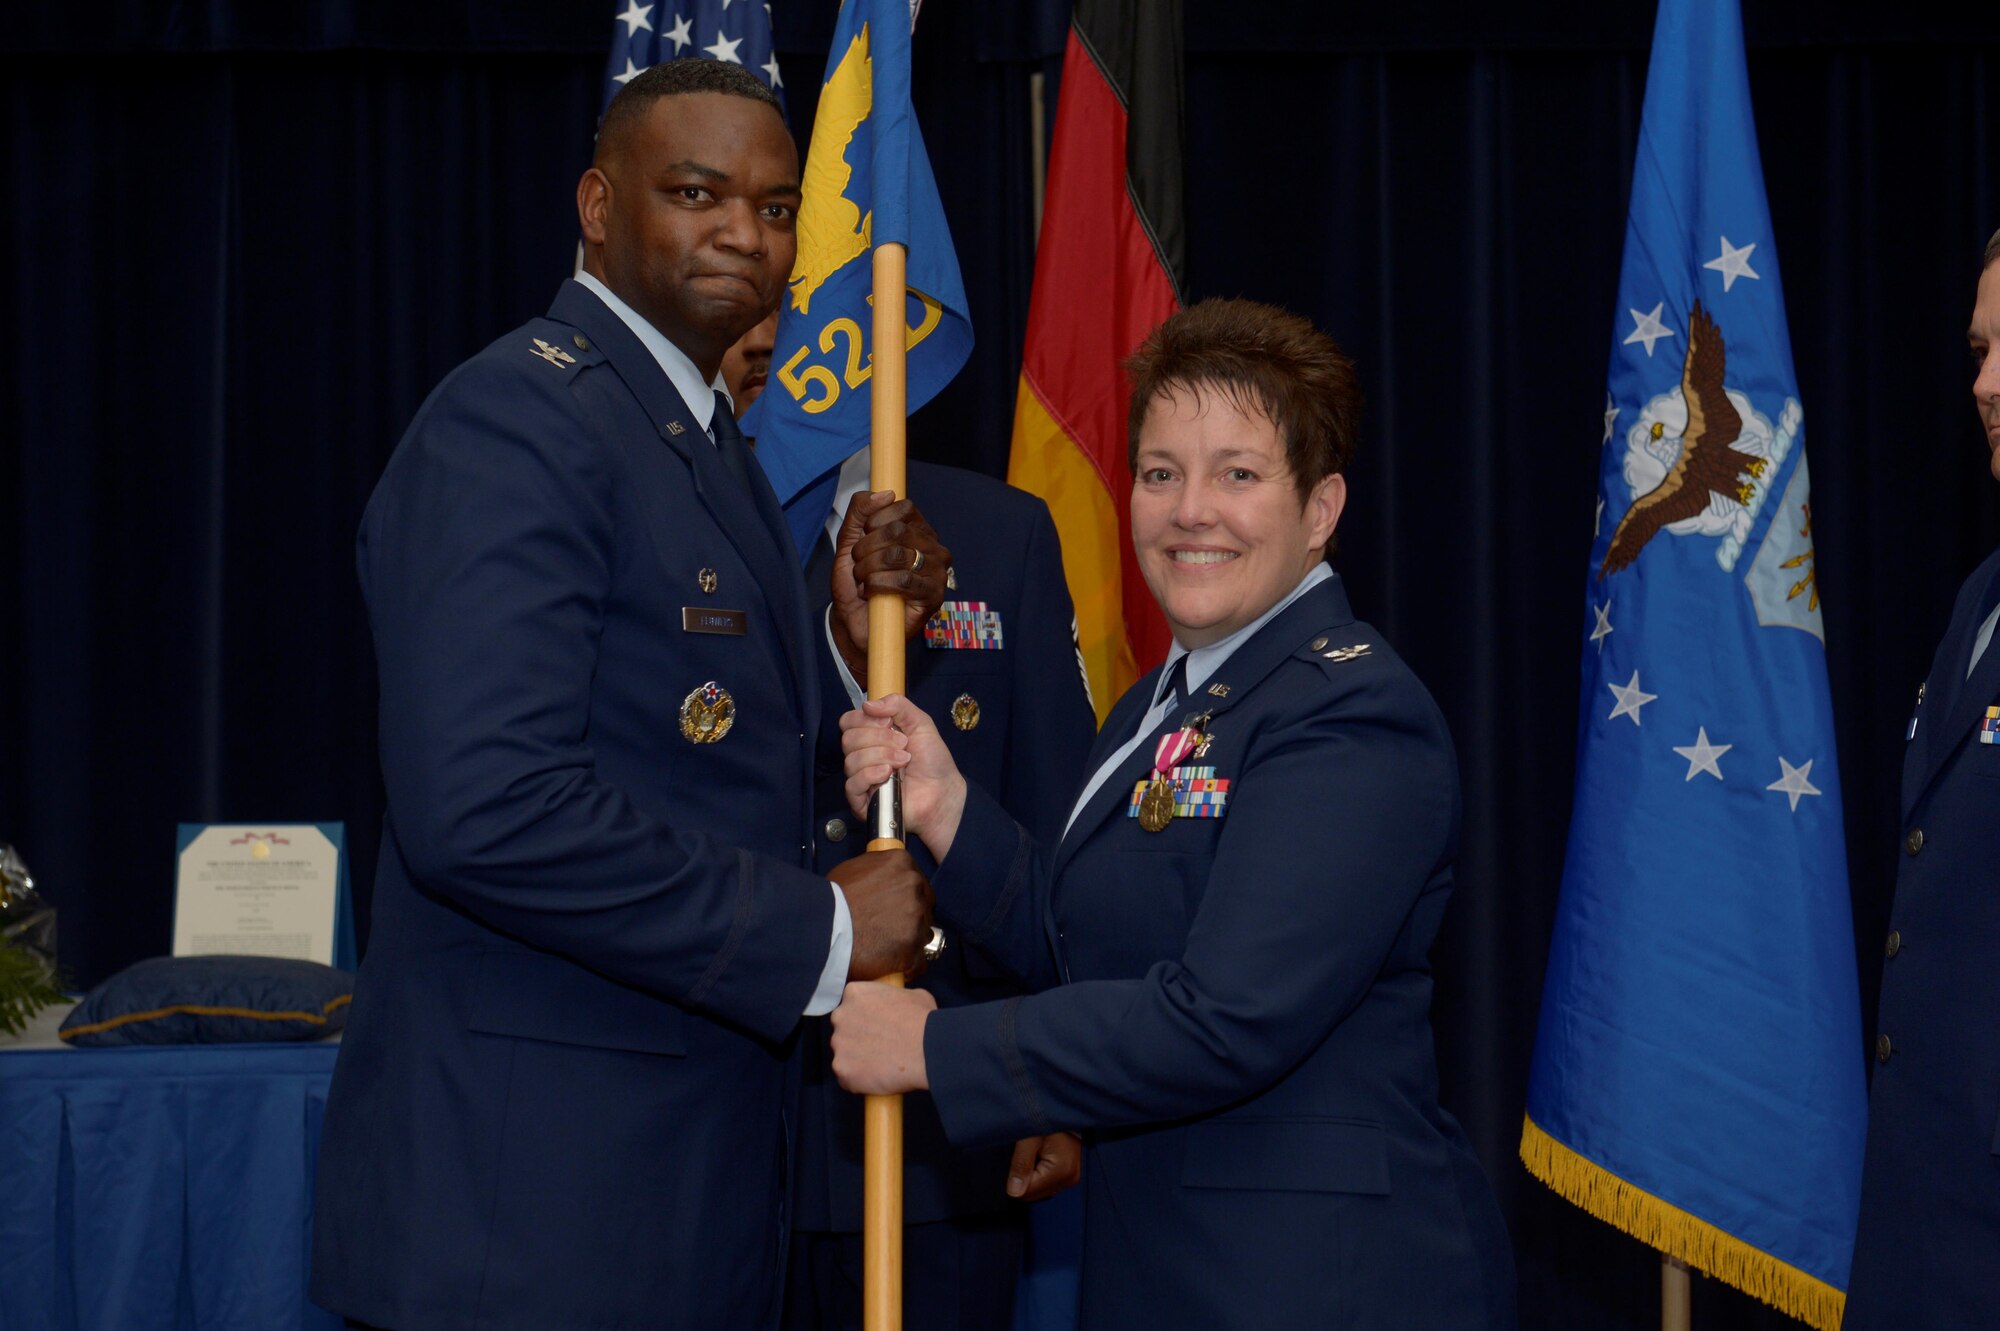 U.S. Air Force Col. Alfred Flowers, 52nd Medical Group commander, left, takes the ceremonial guidon from U.S. Air Force Col. Ann Blake, outgoing 52nd Dental Squadron commander, during the 52nd DS change of command ceremony on Spangdahlem Air Base, Germany, July 11, 2016. The guidon symbolized the authority Flowers placed on Blake, who then relinquished command over the 52nd DS
as the flag exchanged hands. (U.S. Air Force photo by Staff Sgt. Jonathan Snyder/Released)